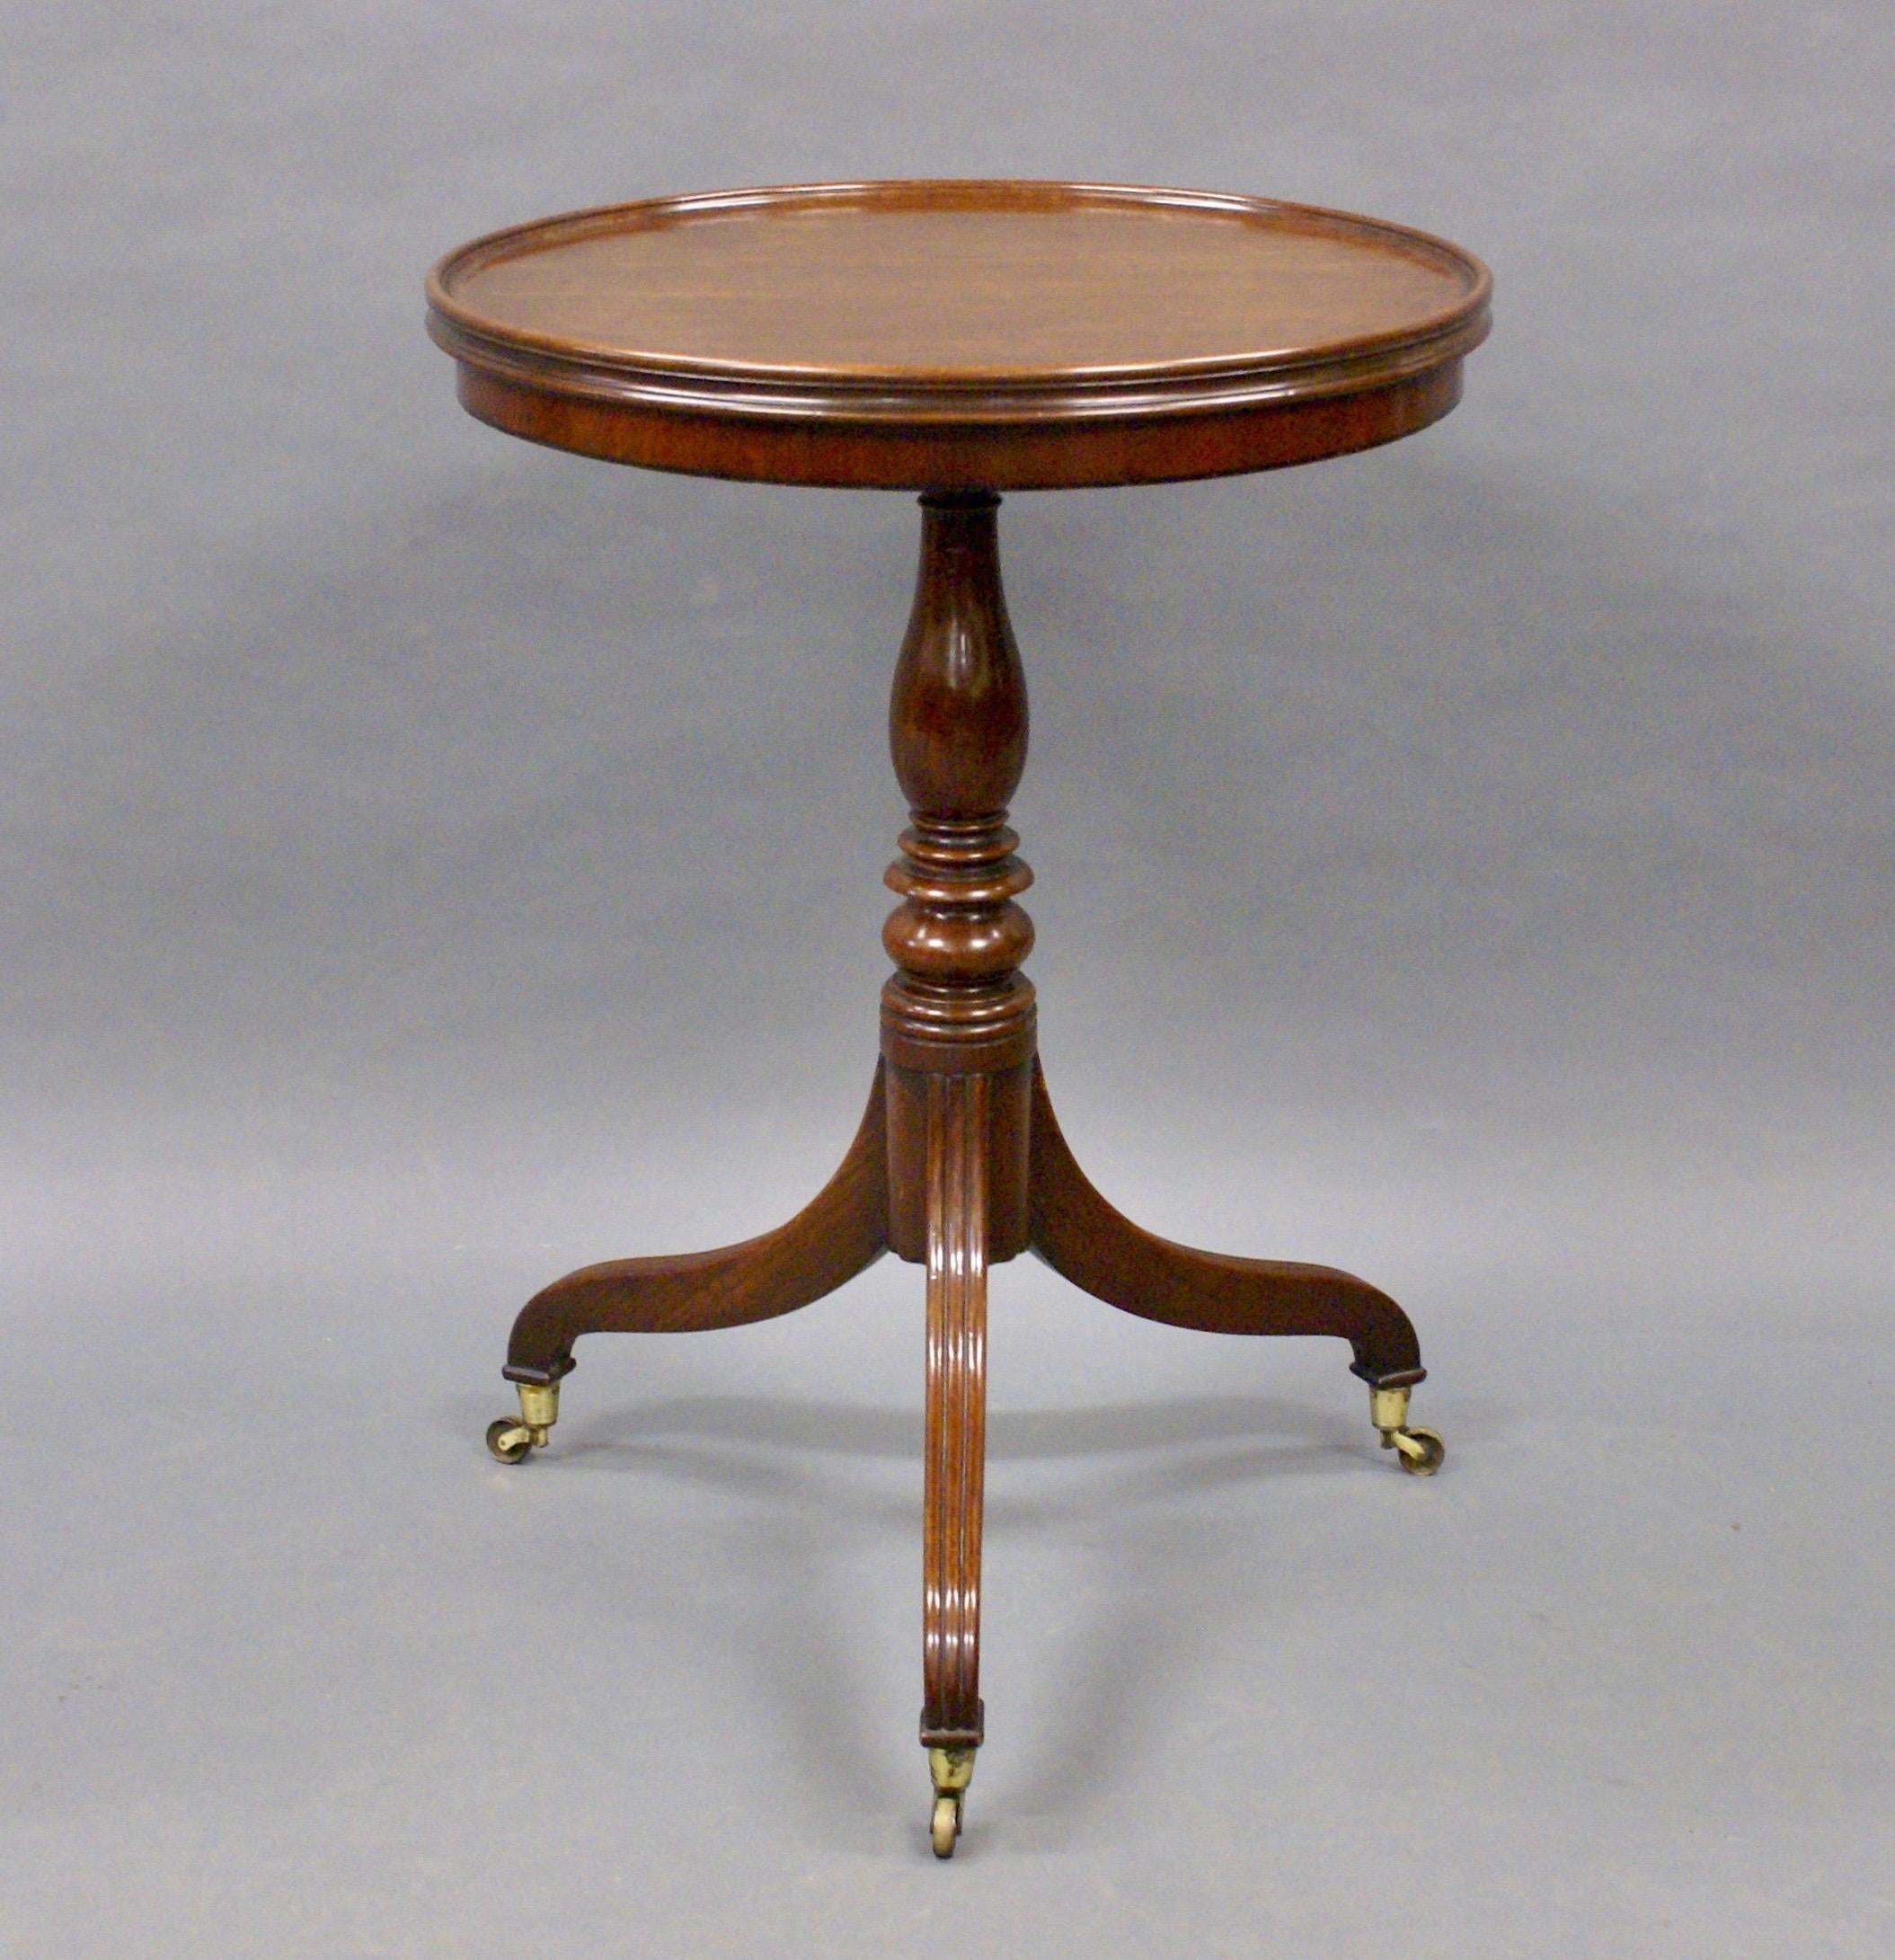 George III Period Mahogany Tray-Top Tripod Table In Good Condition For Sale In South Croydon, GB